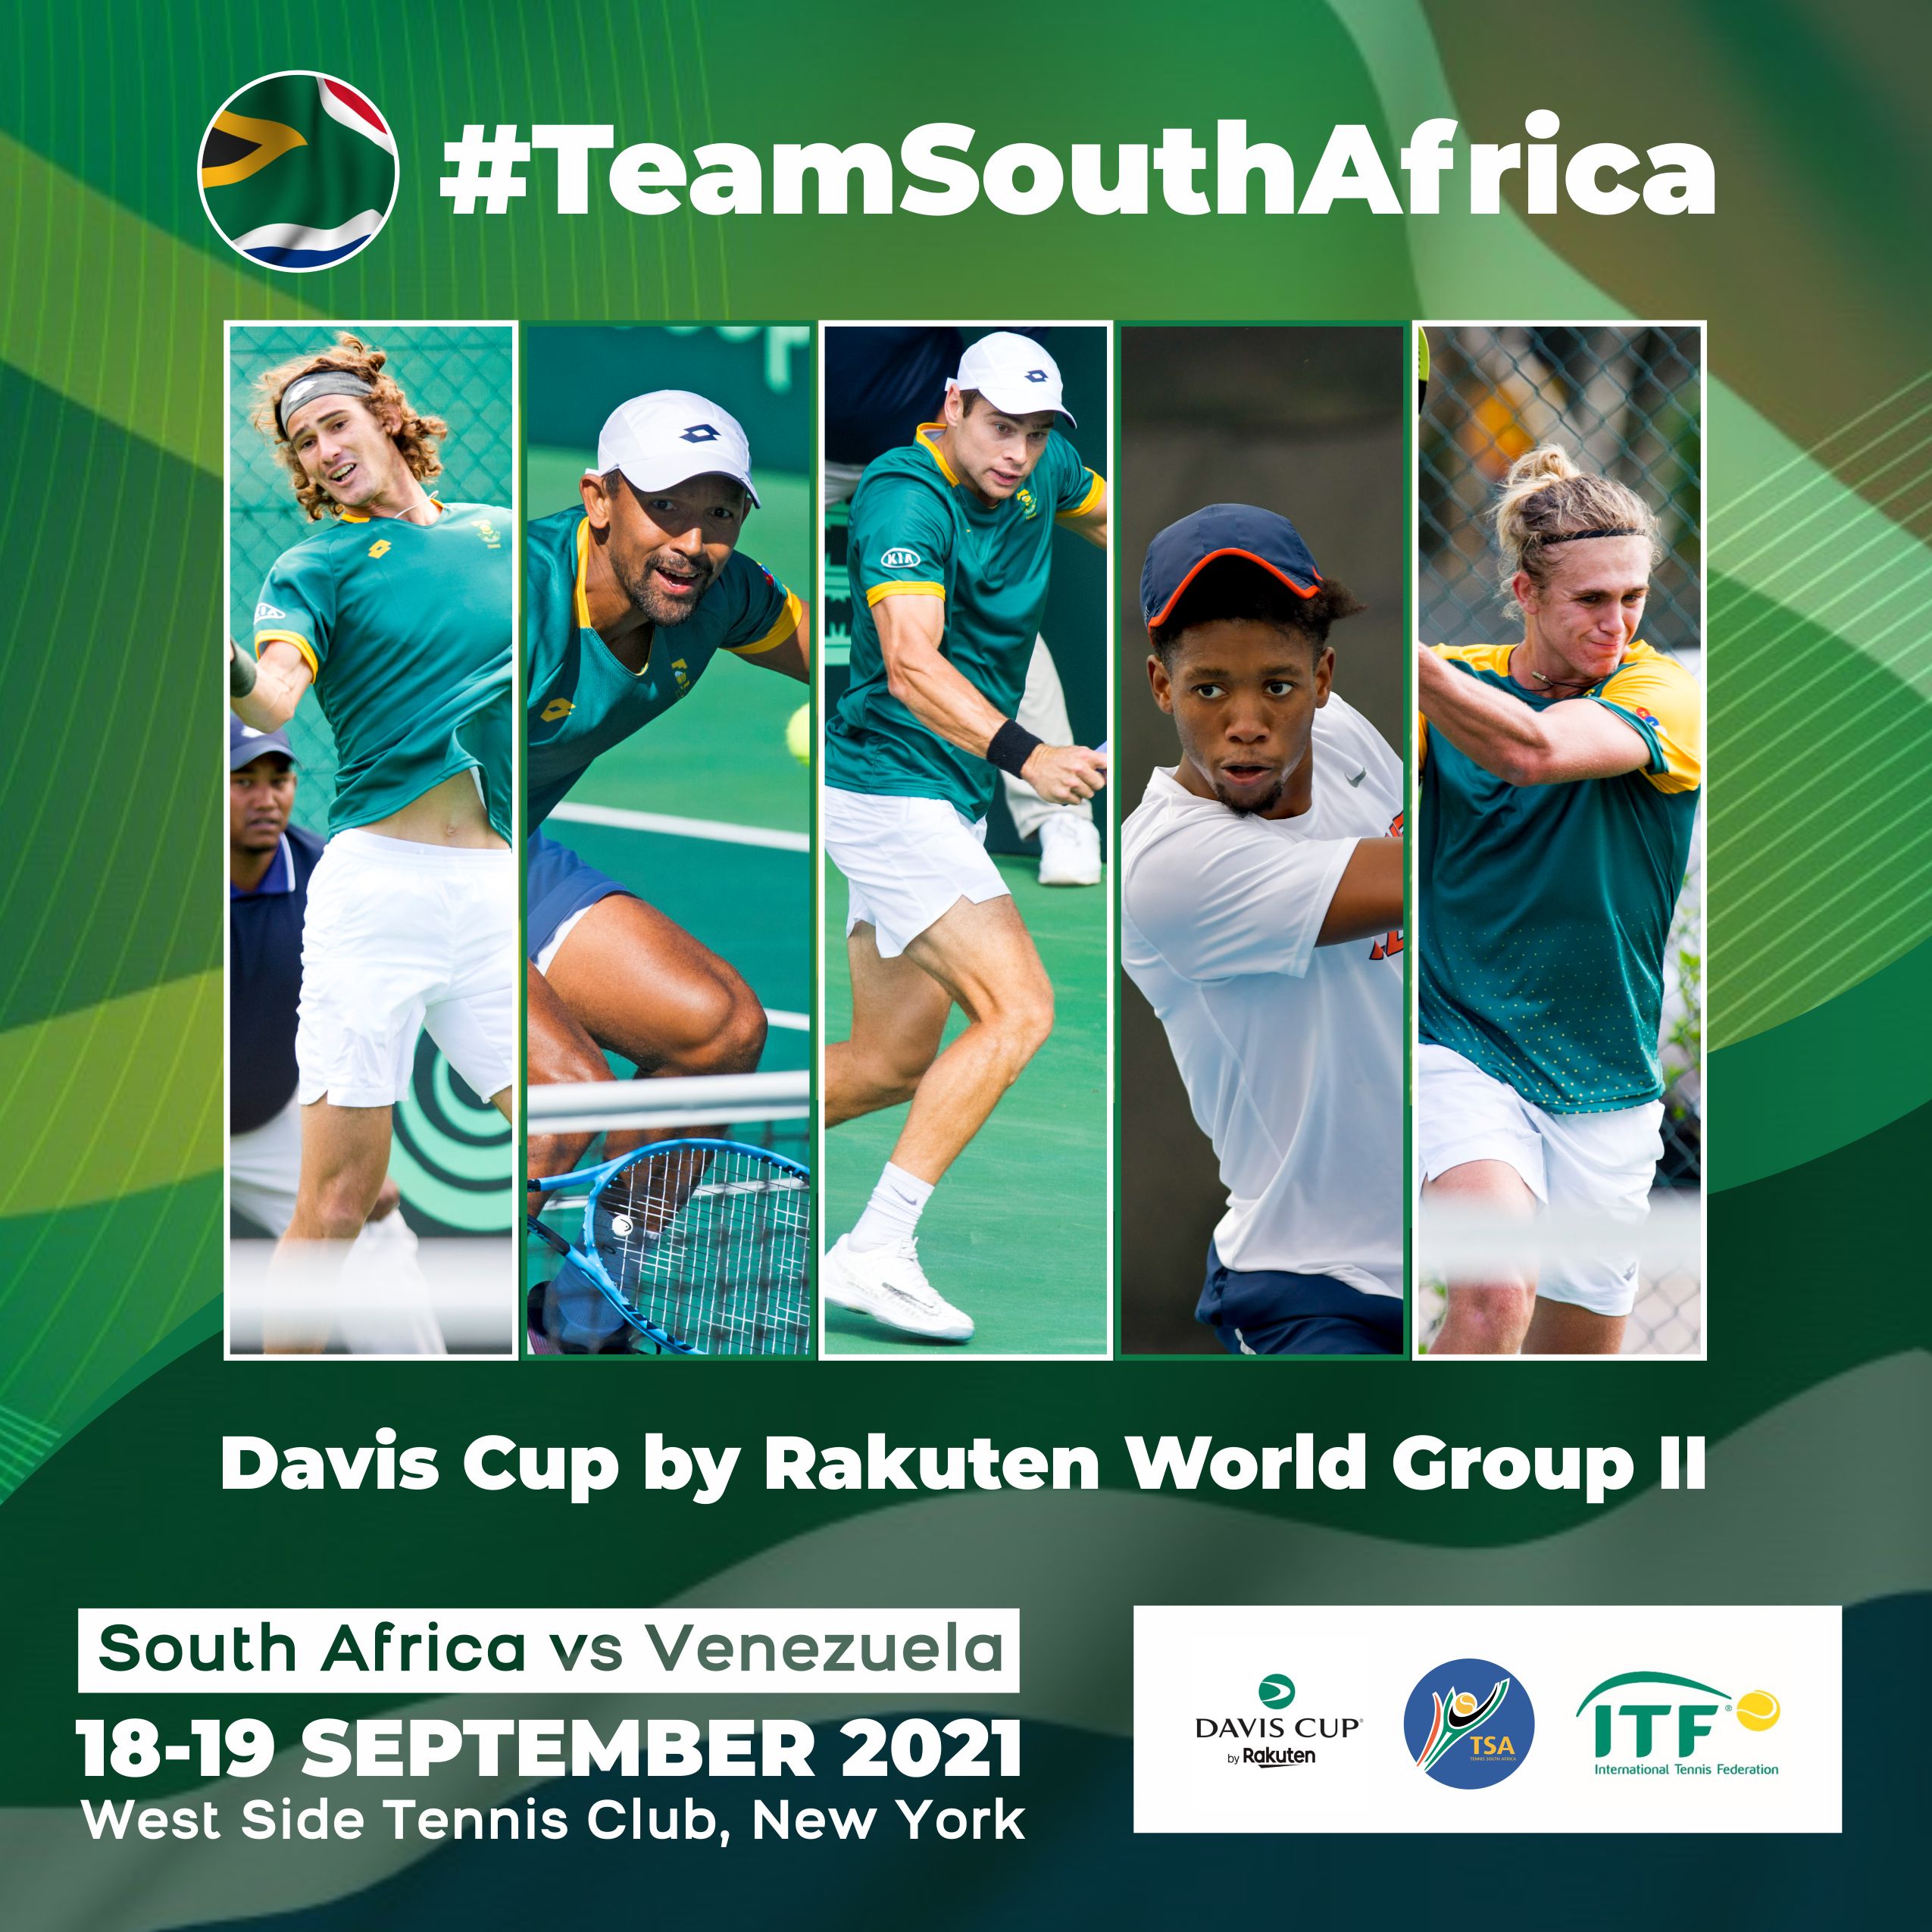 Day 2 Watch Davis Cup action live